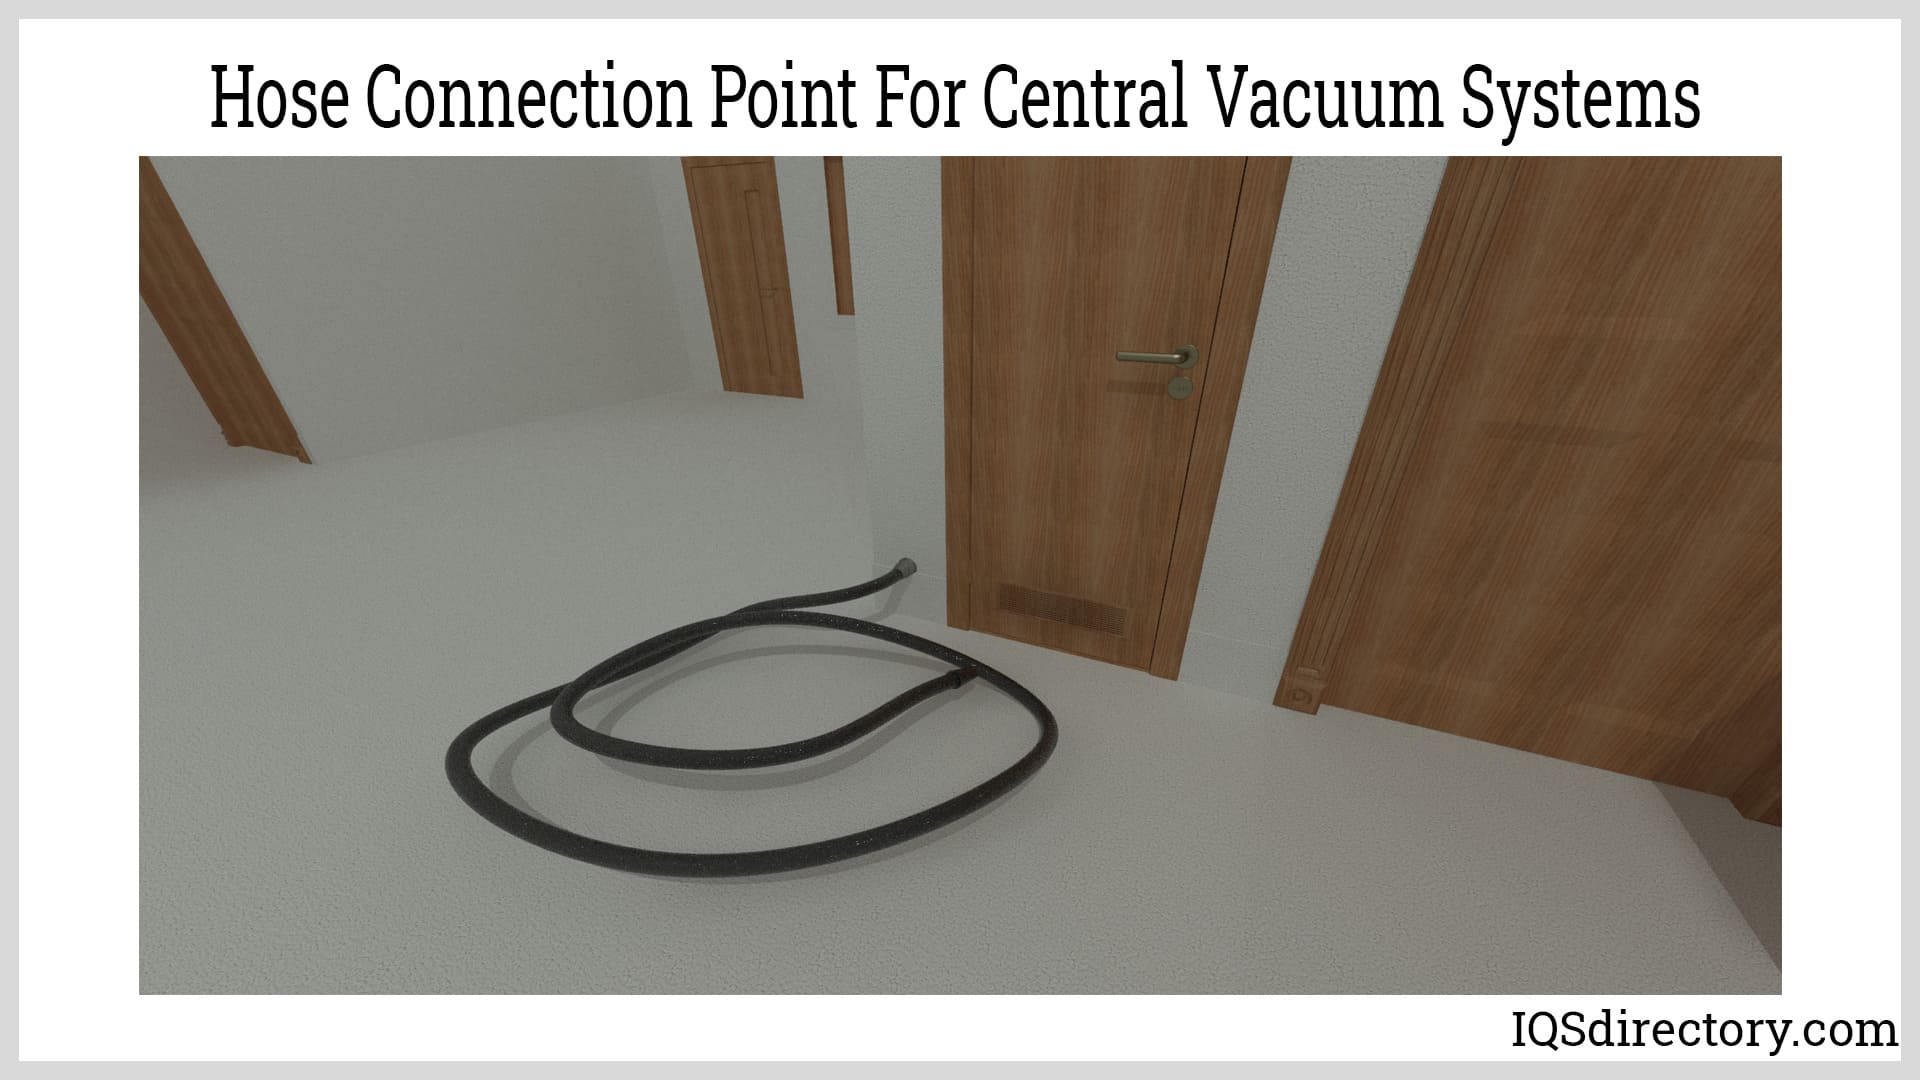 Hose Connection Point For Central Vacuum Systems